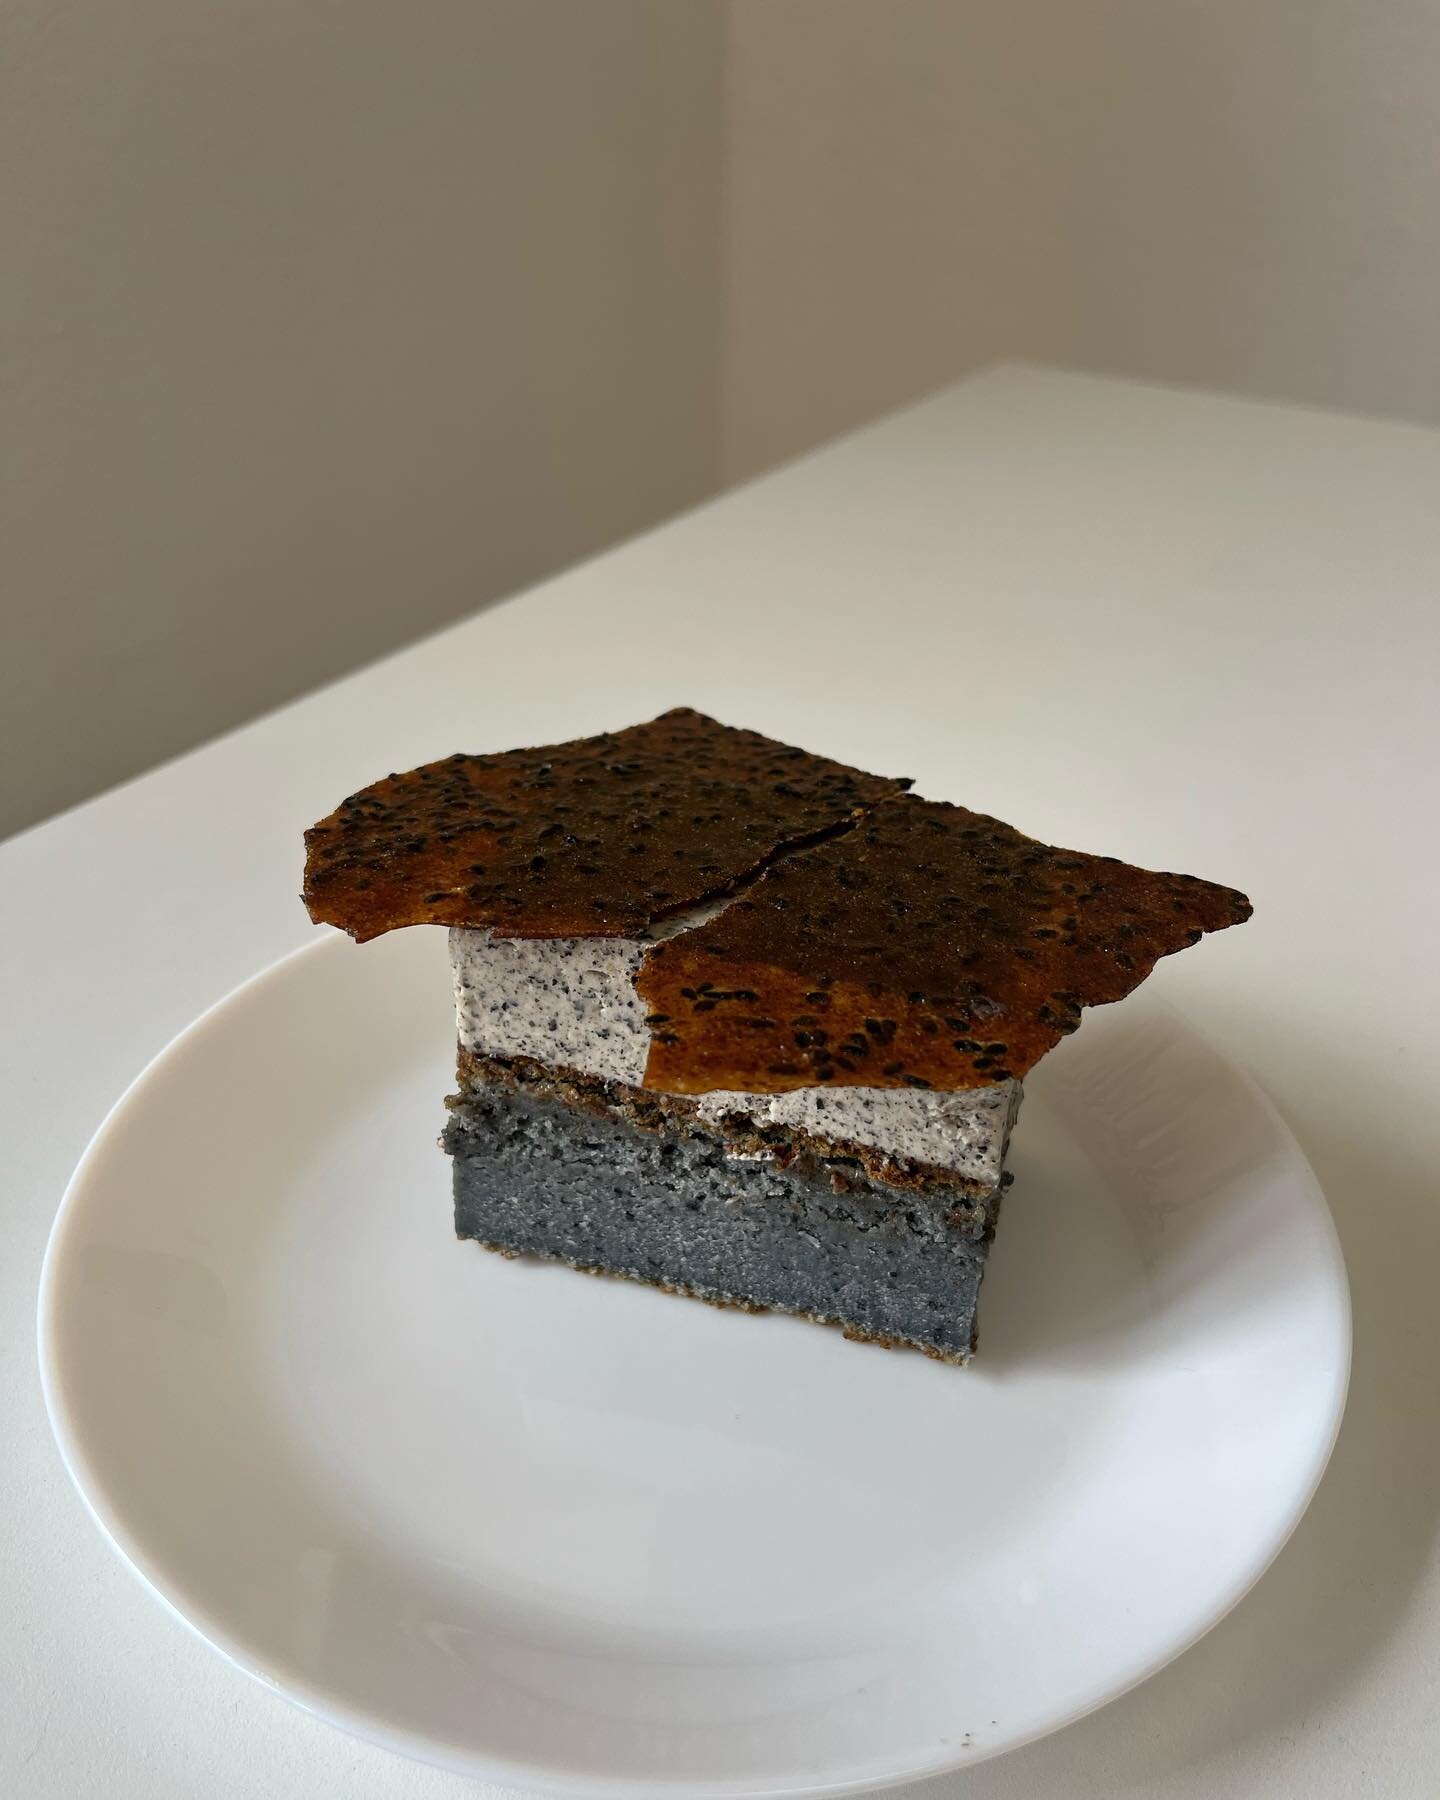 You are going to love these never-too-sweet treats from our talented friend Stephanie Fong, owner and party chef @go_cakes
 
🍰Black Sesame White Chocolate
🌼Daisy Caramel Tart